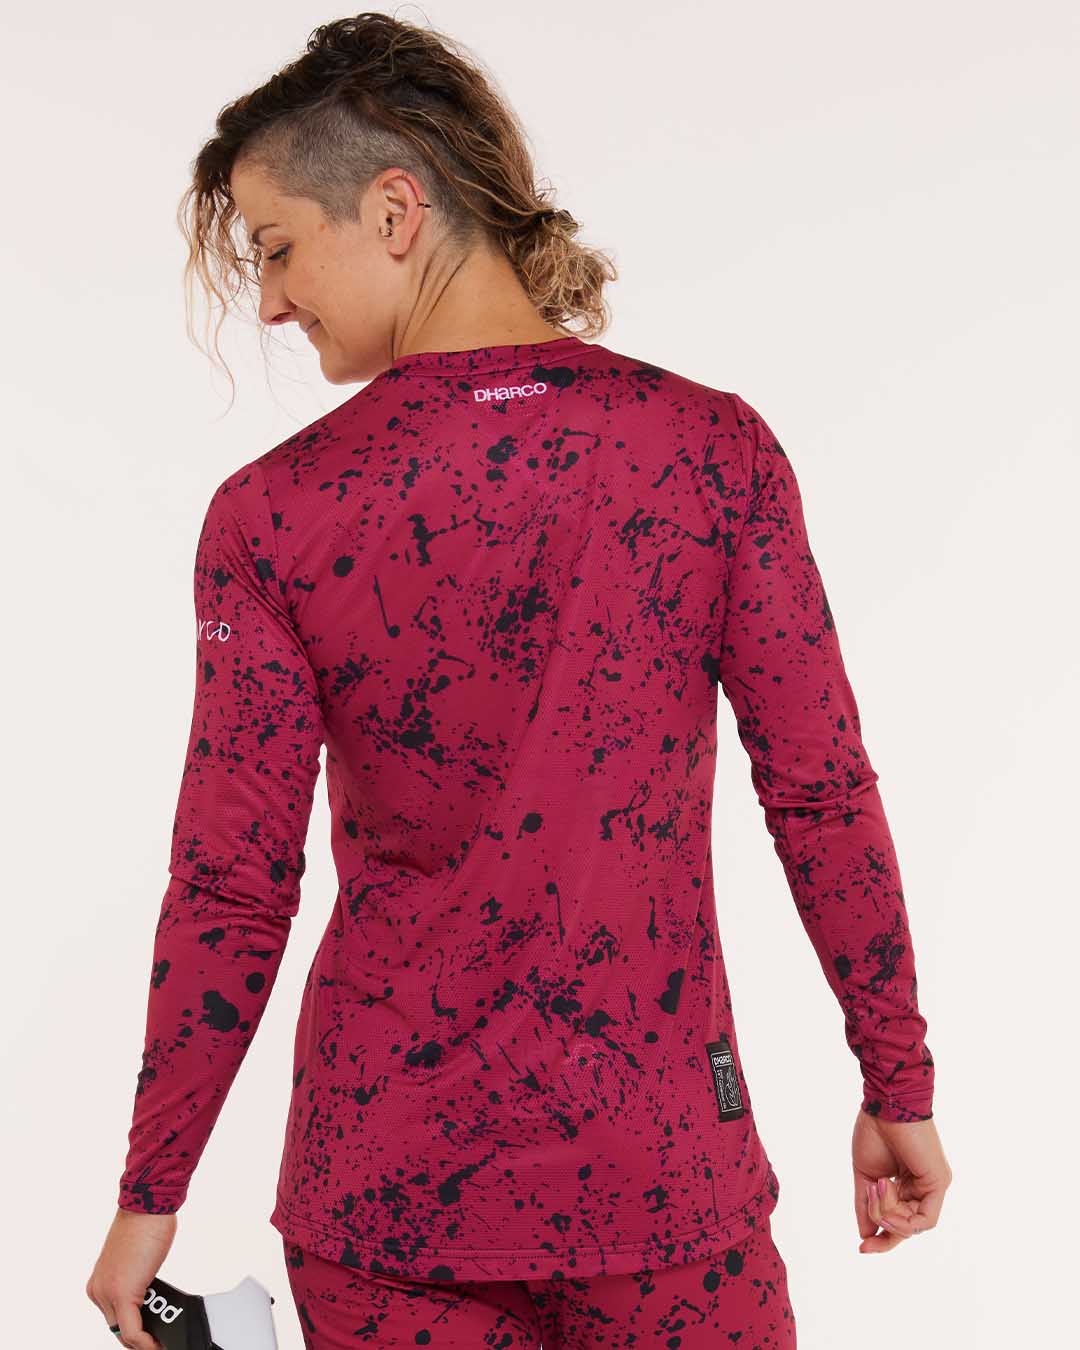 Womens Race Jersey | Chili Peppers